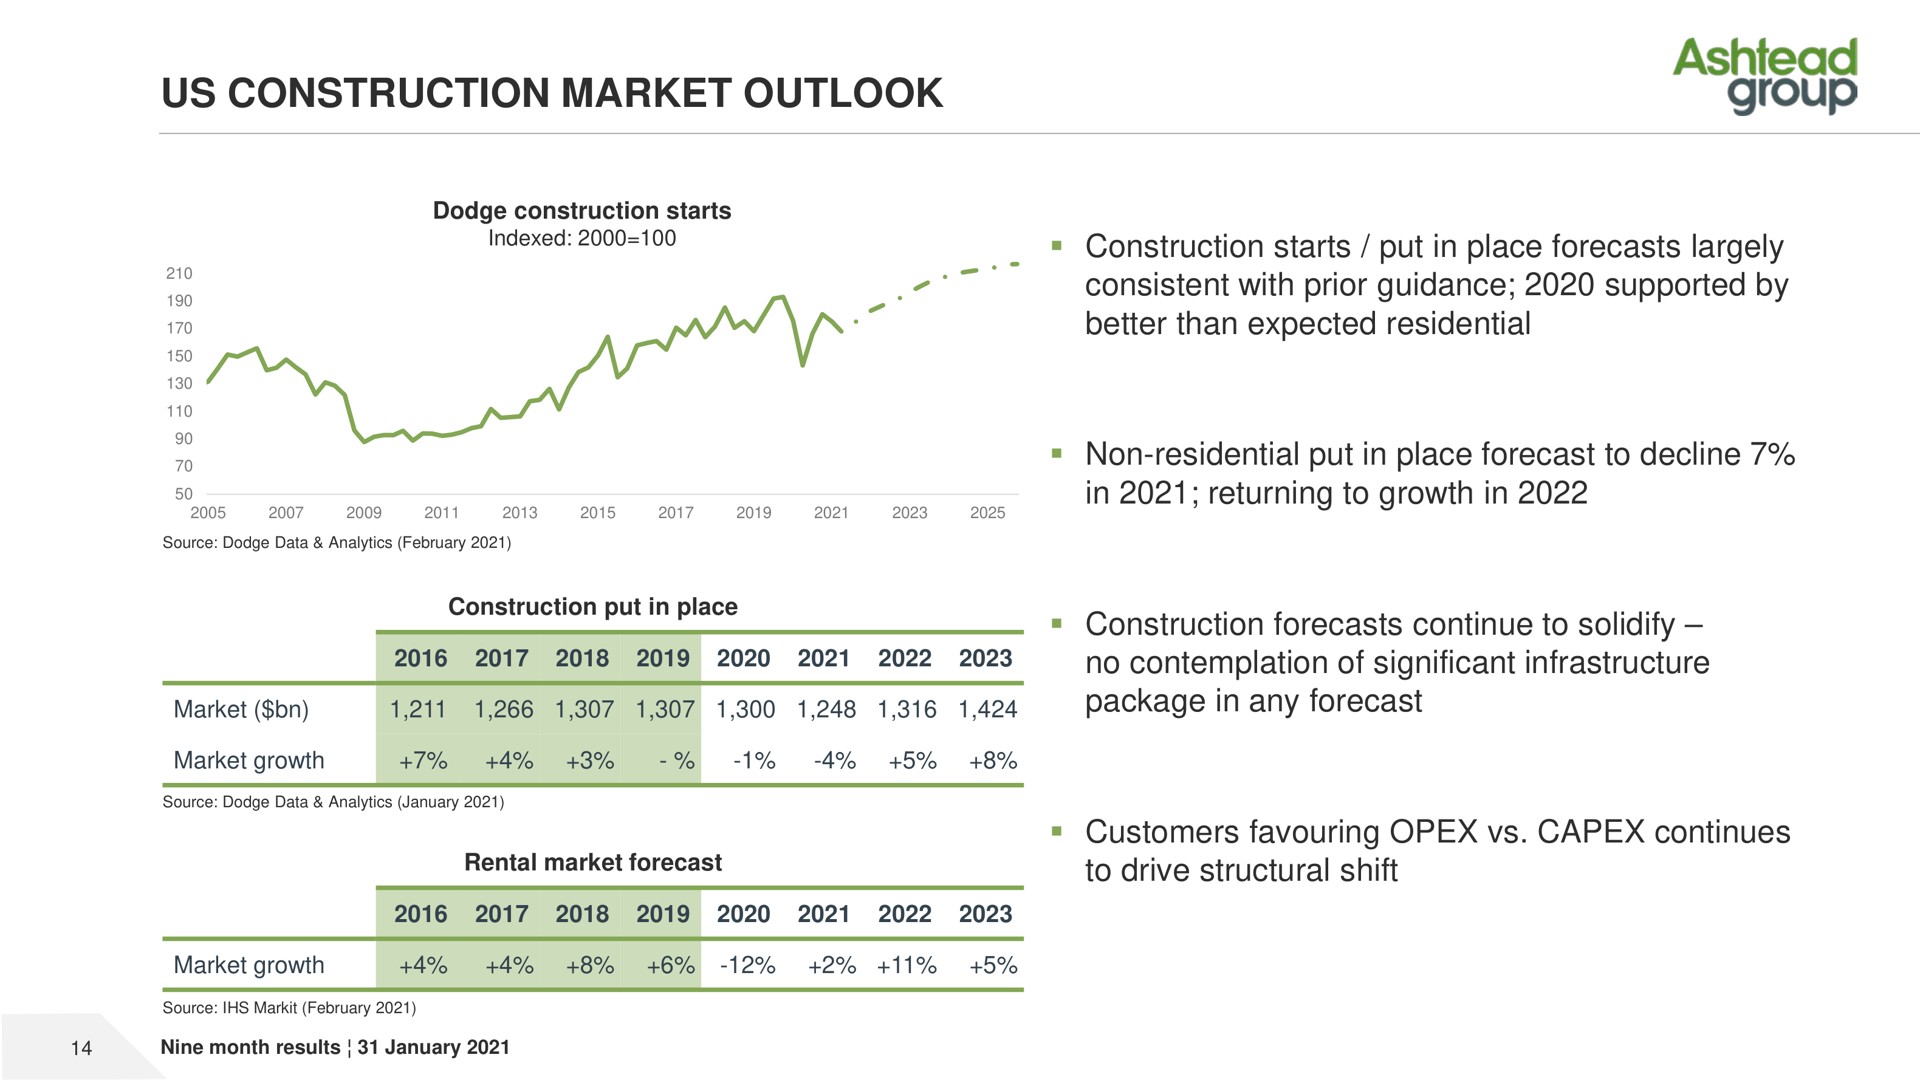 us construction market outlook construction starts put in place forecasts largely consistent with prior guidance supported by better than expected residential non residential put in place forecast to decline in returning to growth in construction forecasts continue to solidify no contemplation of significant infrastructure package in any forecast to drive structural shift customers continues group | Ashtead Group